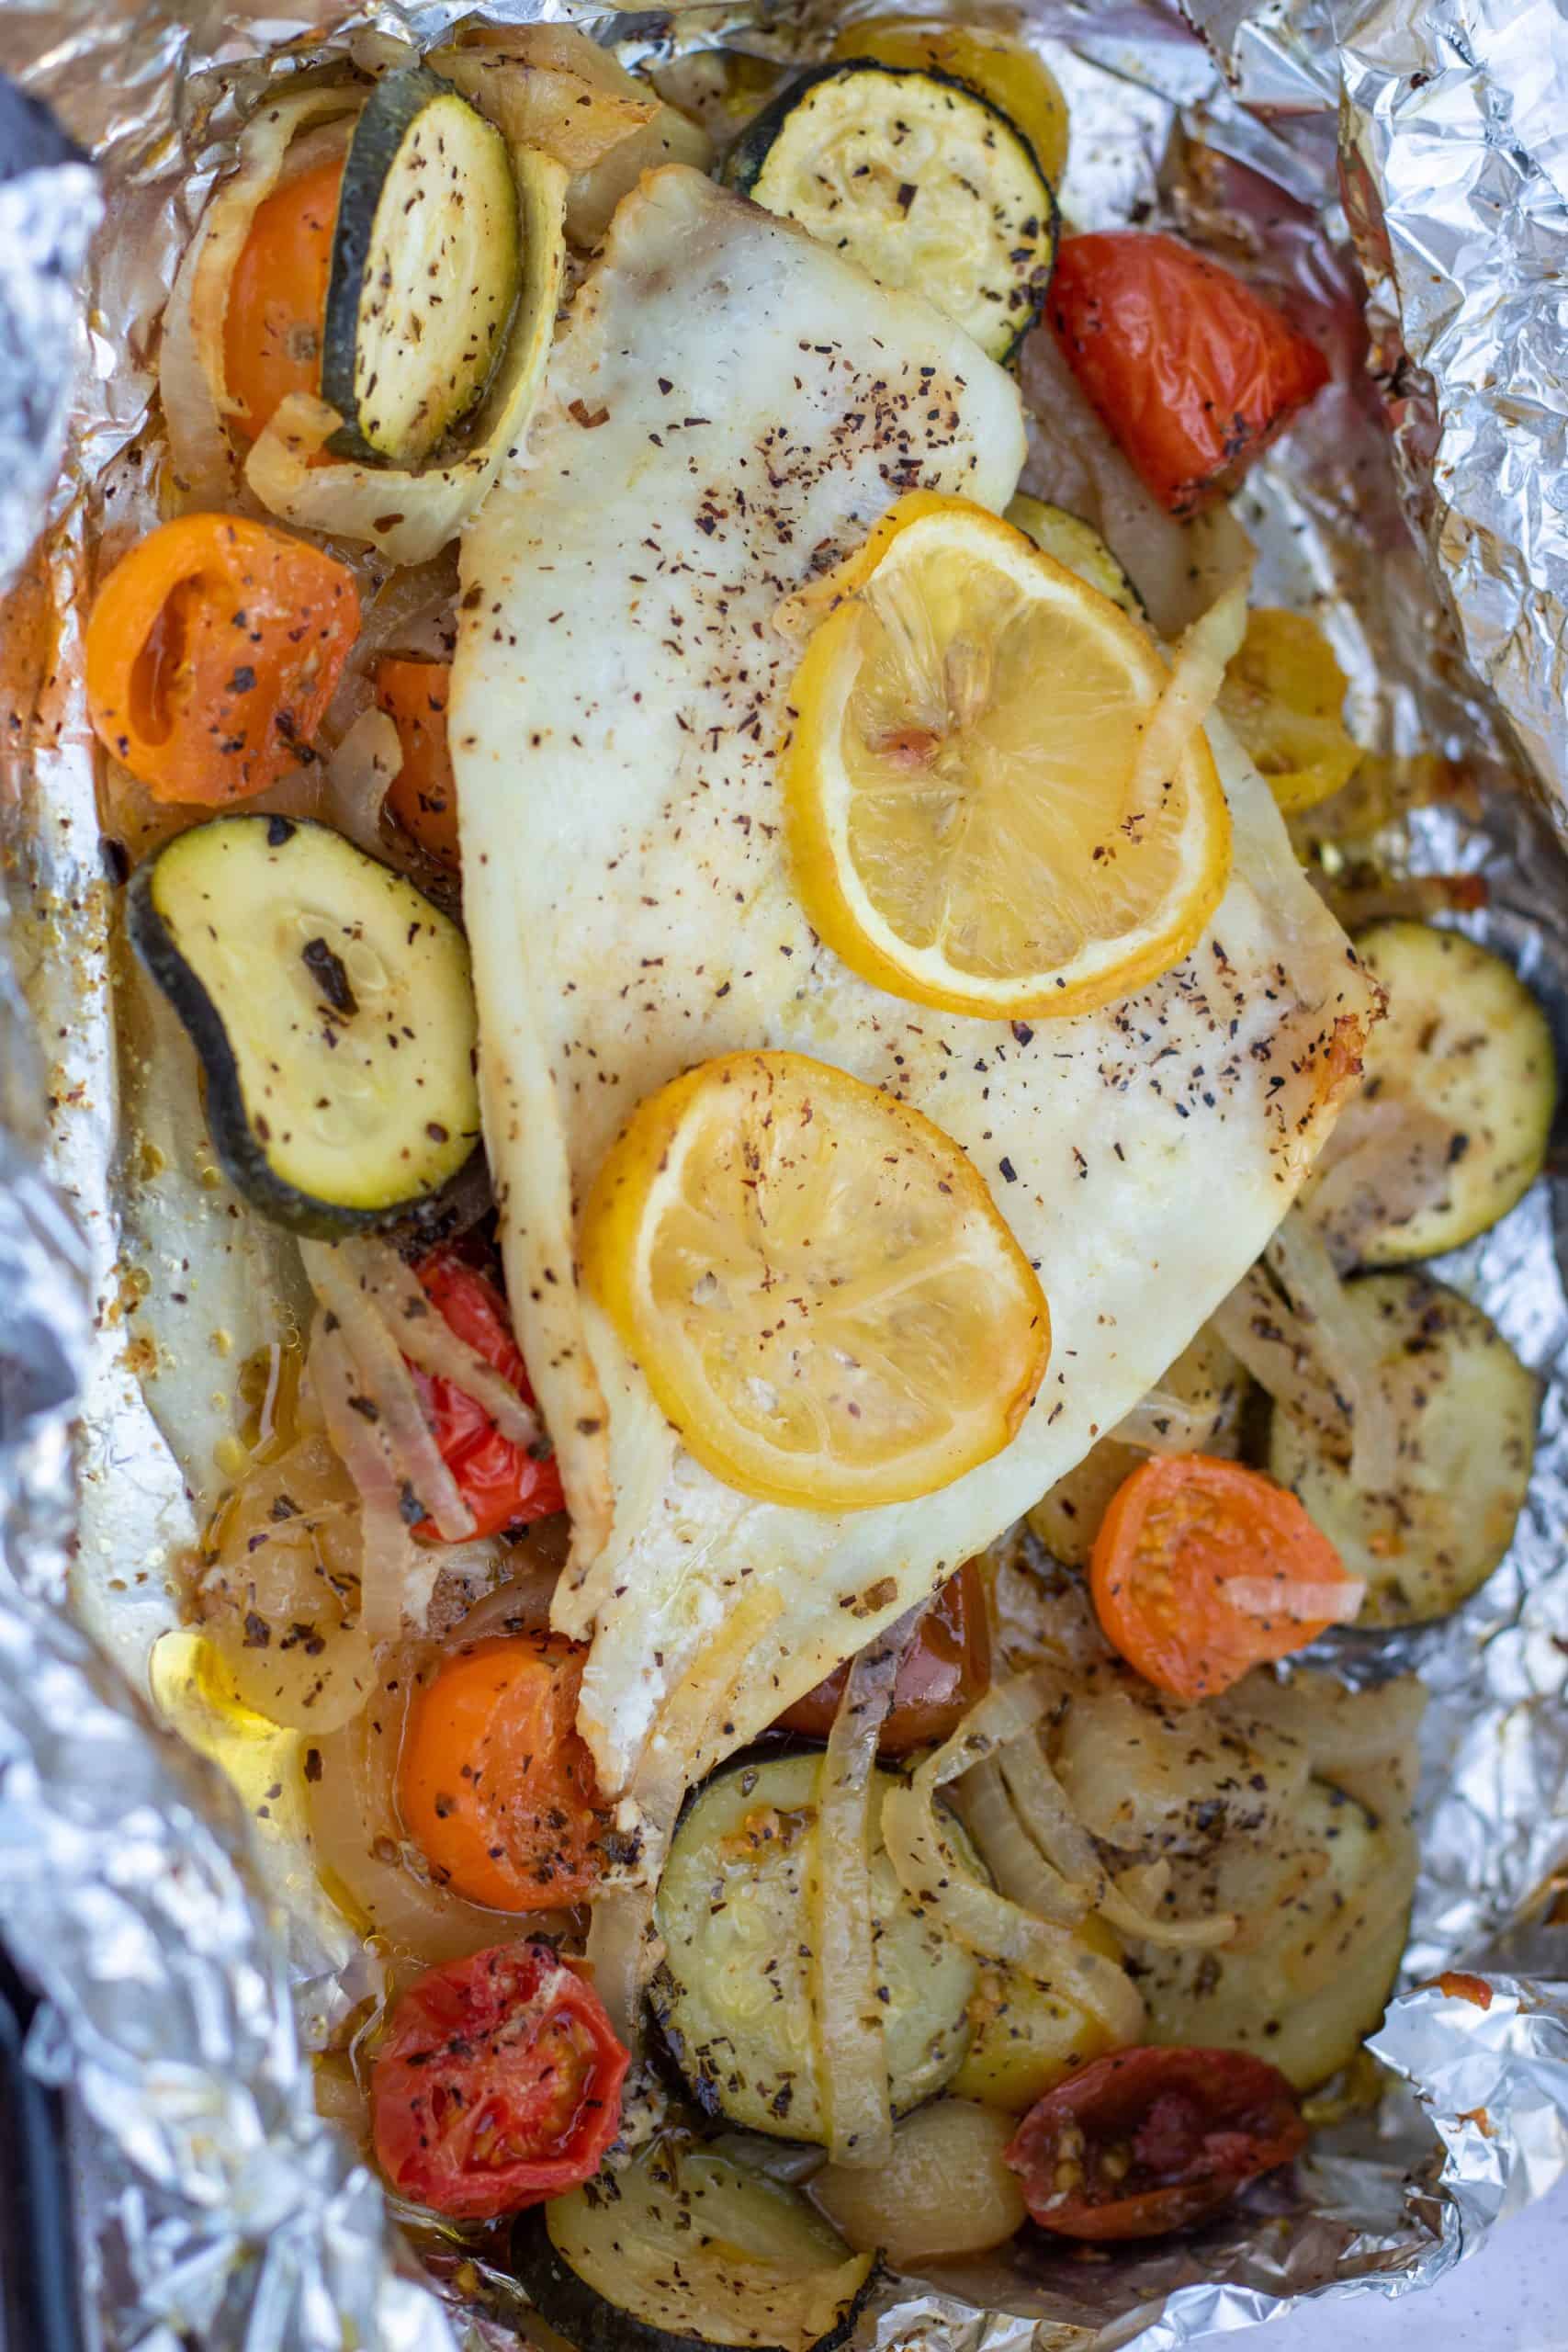 A single piece of white fish in foil, surrounded by roasted cherry tomatoes that are yellow, red and orange, sliced zucchini and caramelized onions. The fish is baked in the oven in a foil packet. Two slices of lemon are on top of the fish